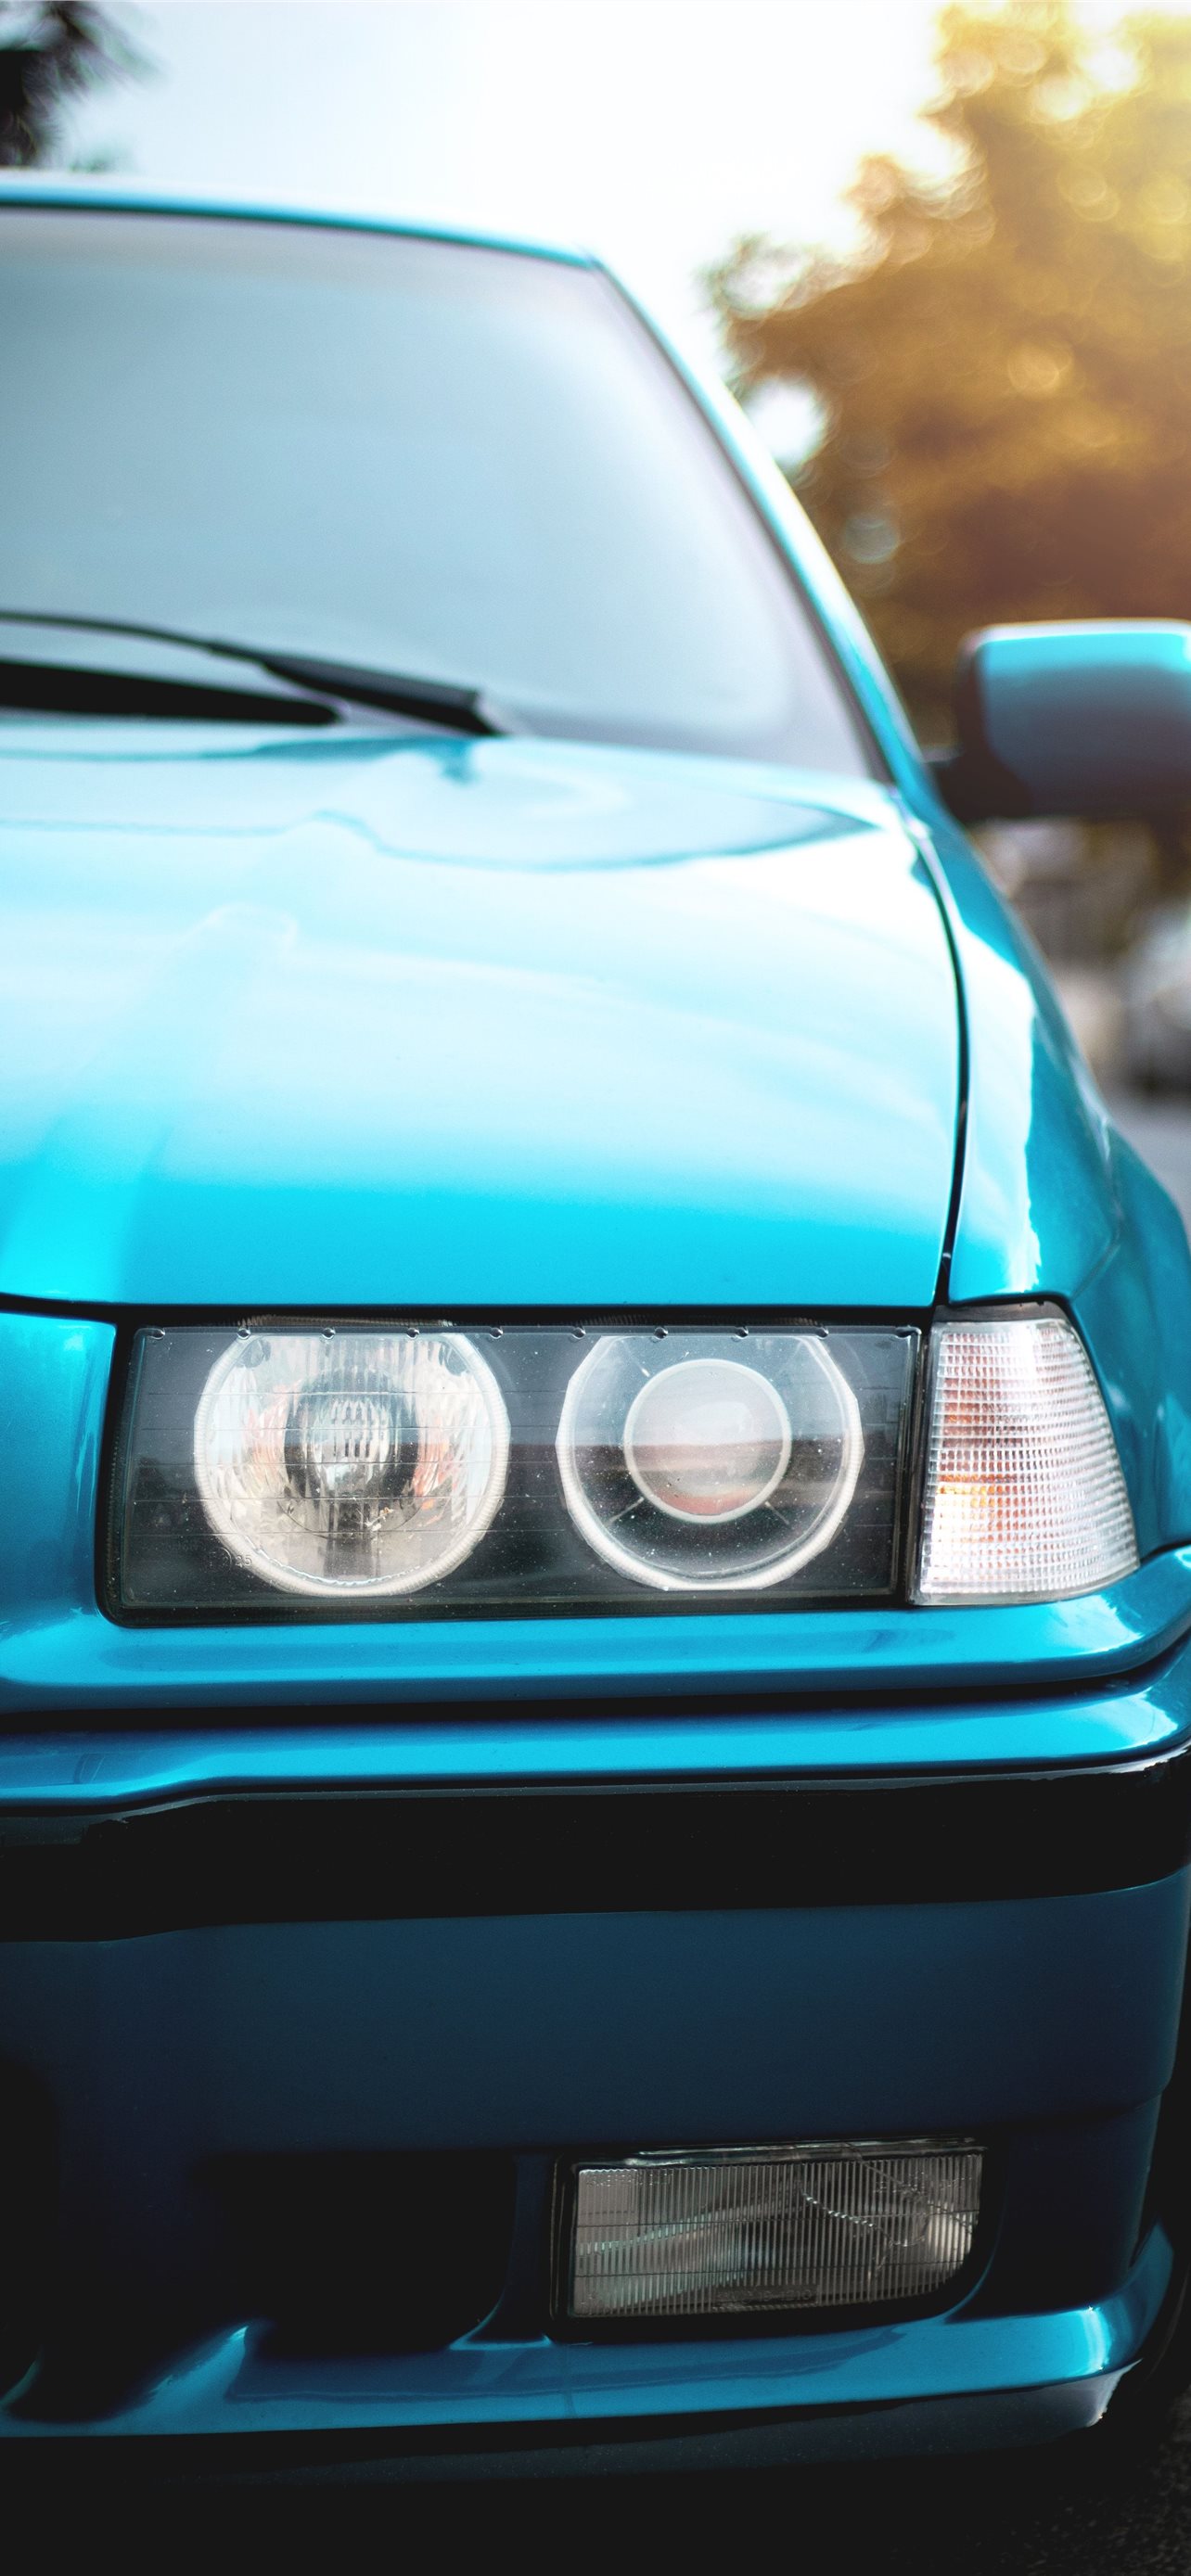 bmw e36 iPhone Wallpaper Free Download